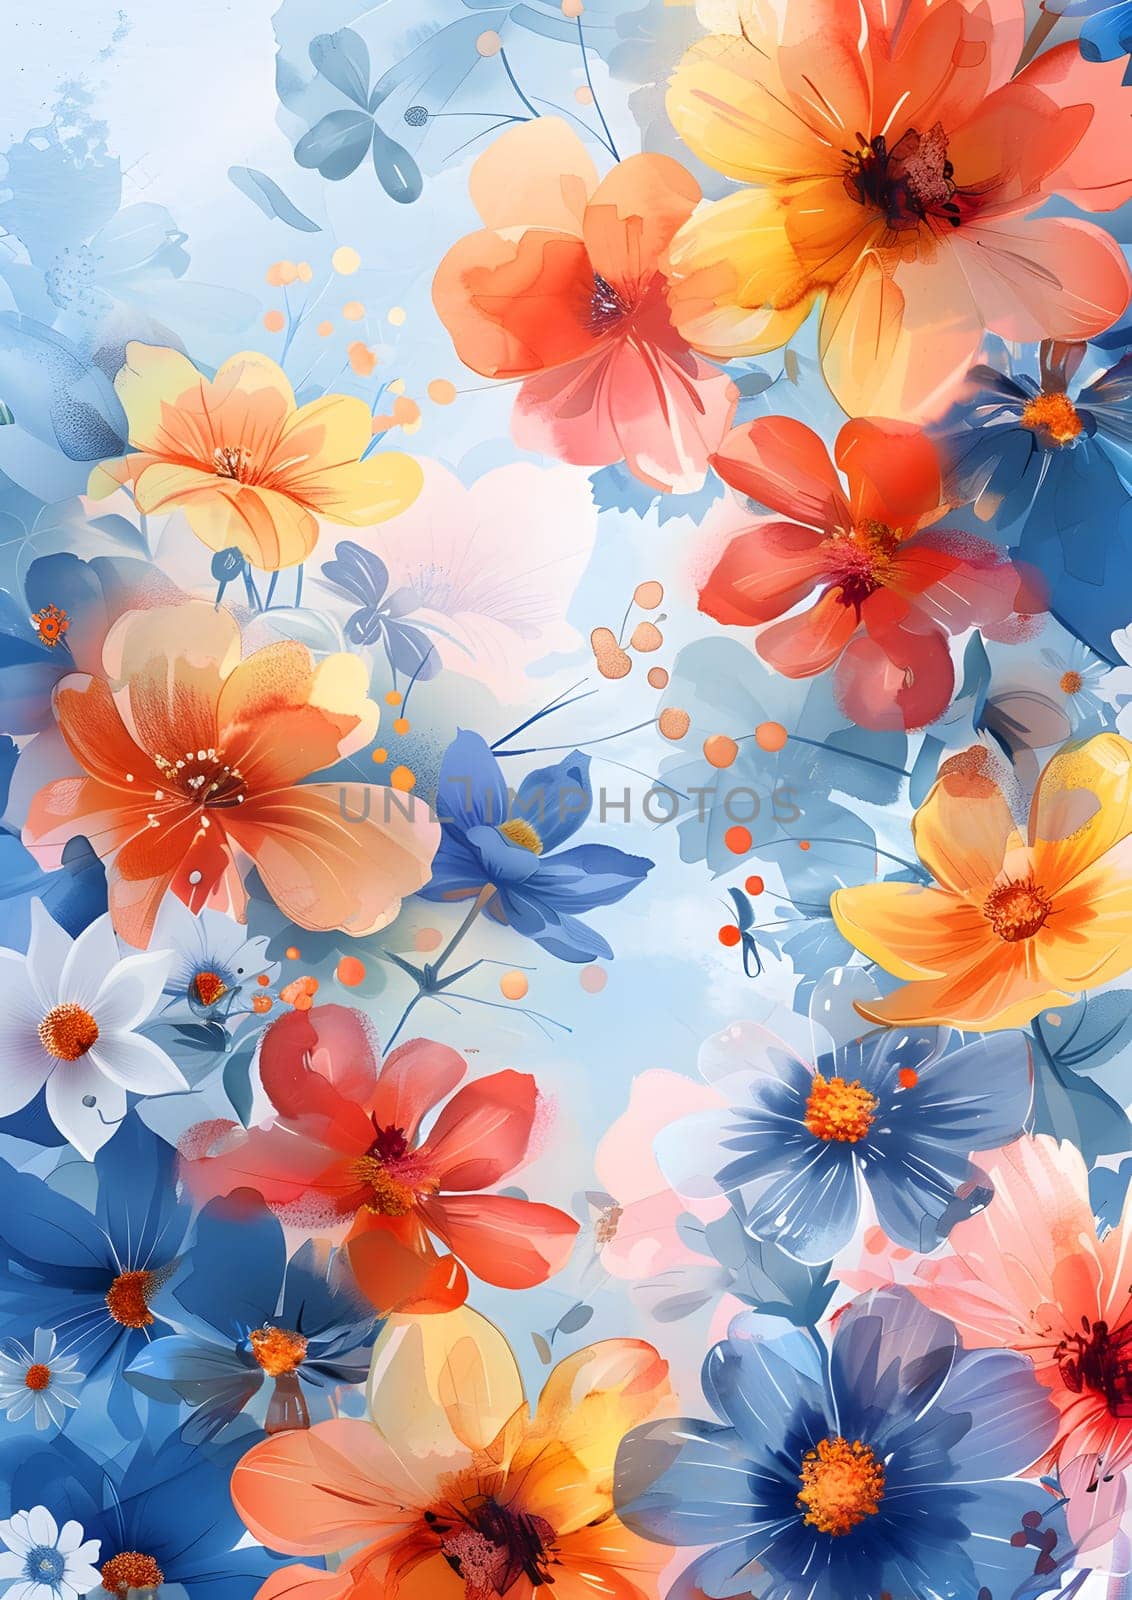 Vibrant flowers bloom on azure canvas, depicting natures beauty through art by Nadtochiy